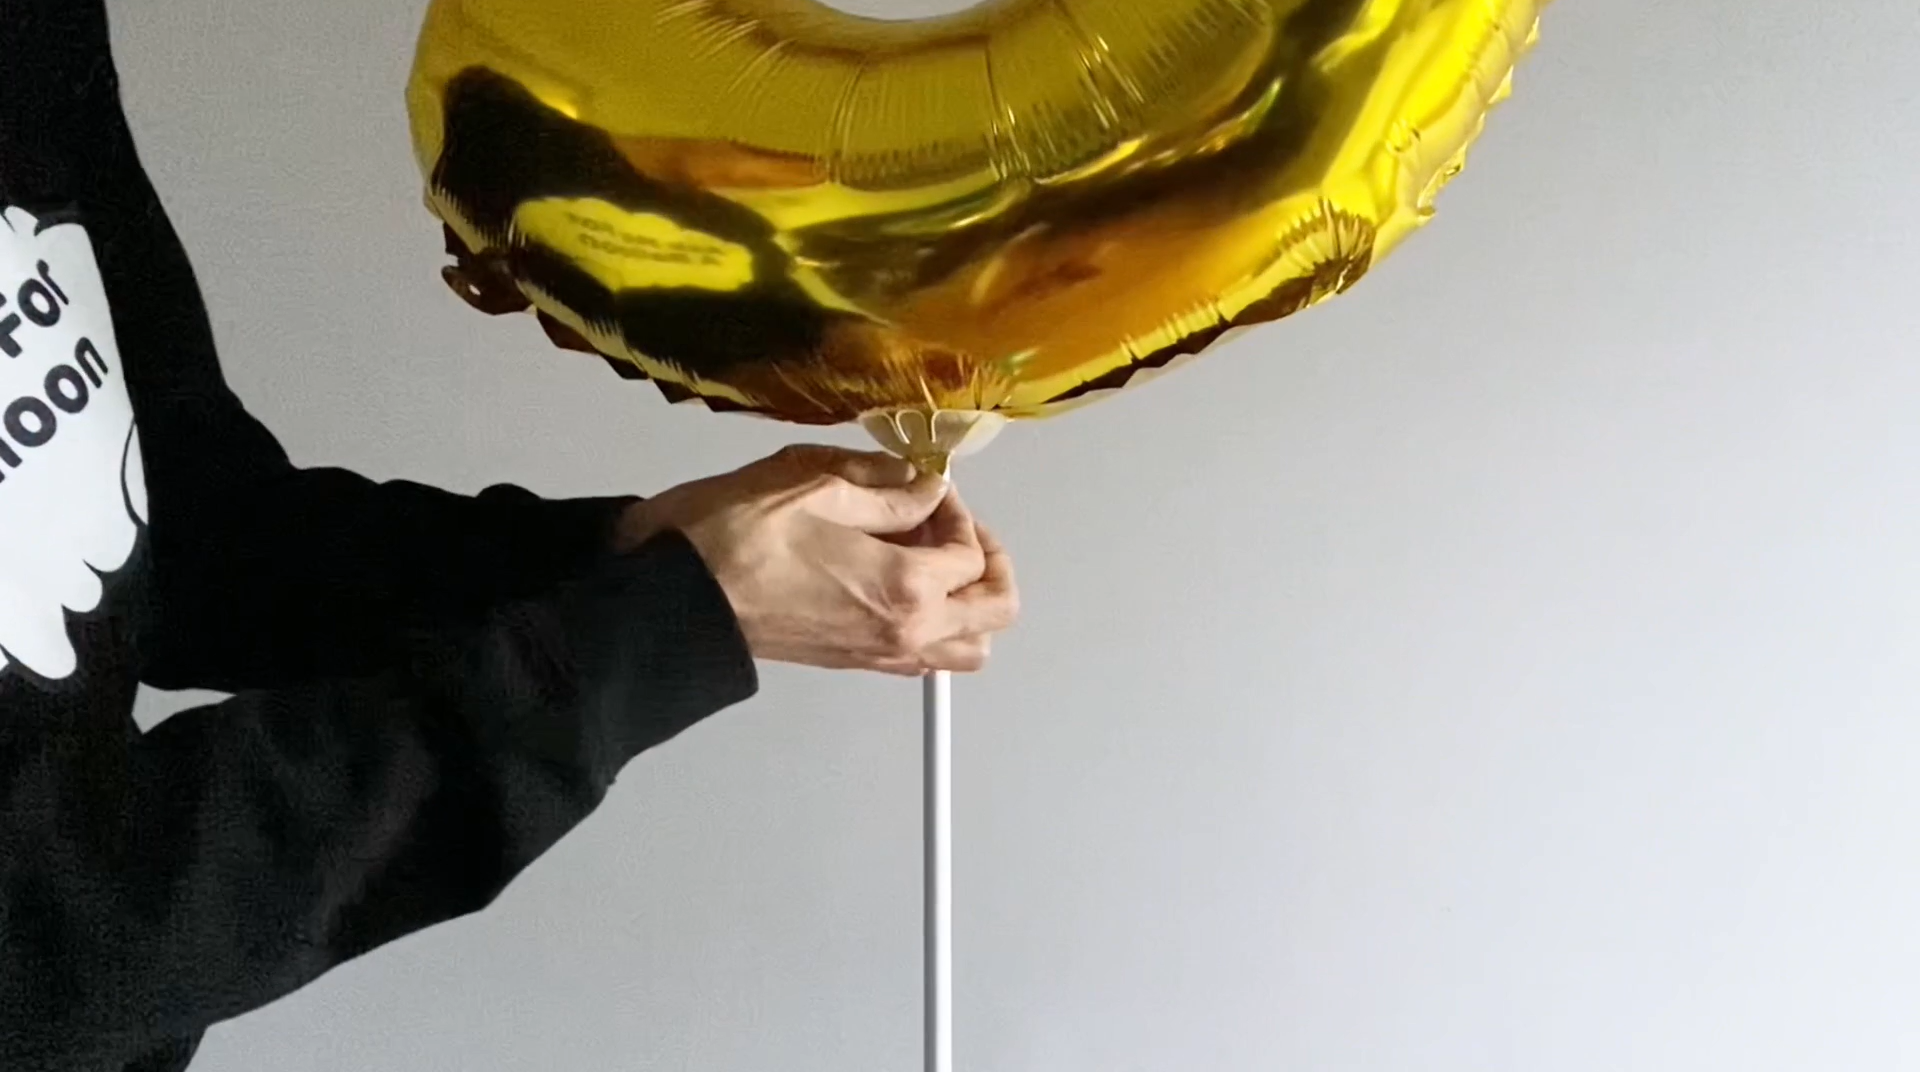 Inflating the mylar foil number balloon